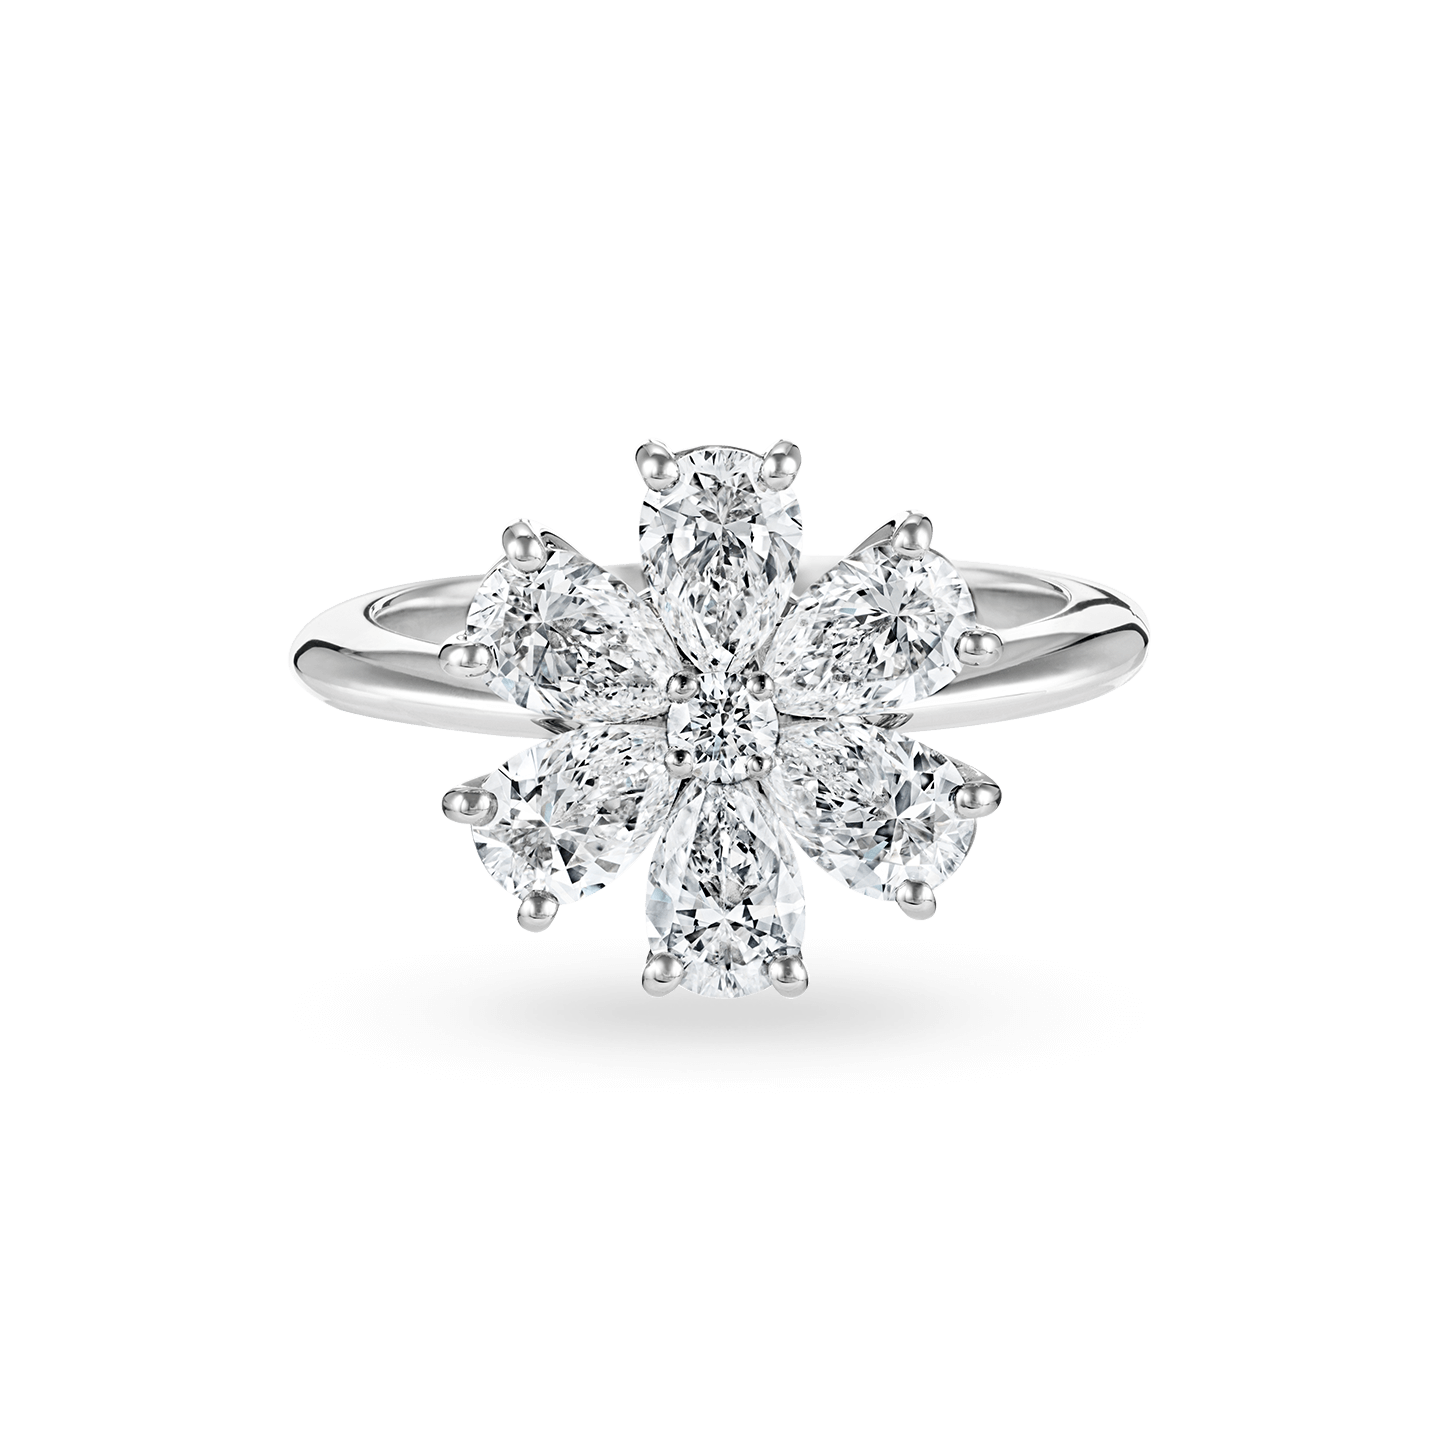 Forget-Me-Not Diamond Ring, Product Image 1